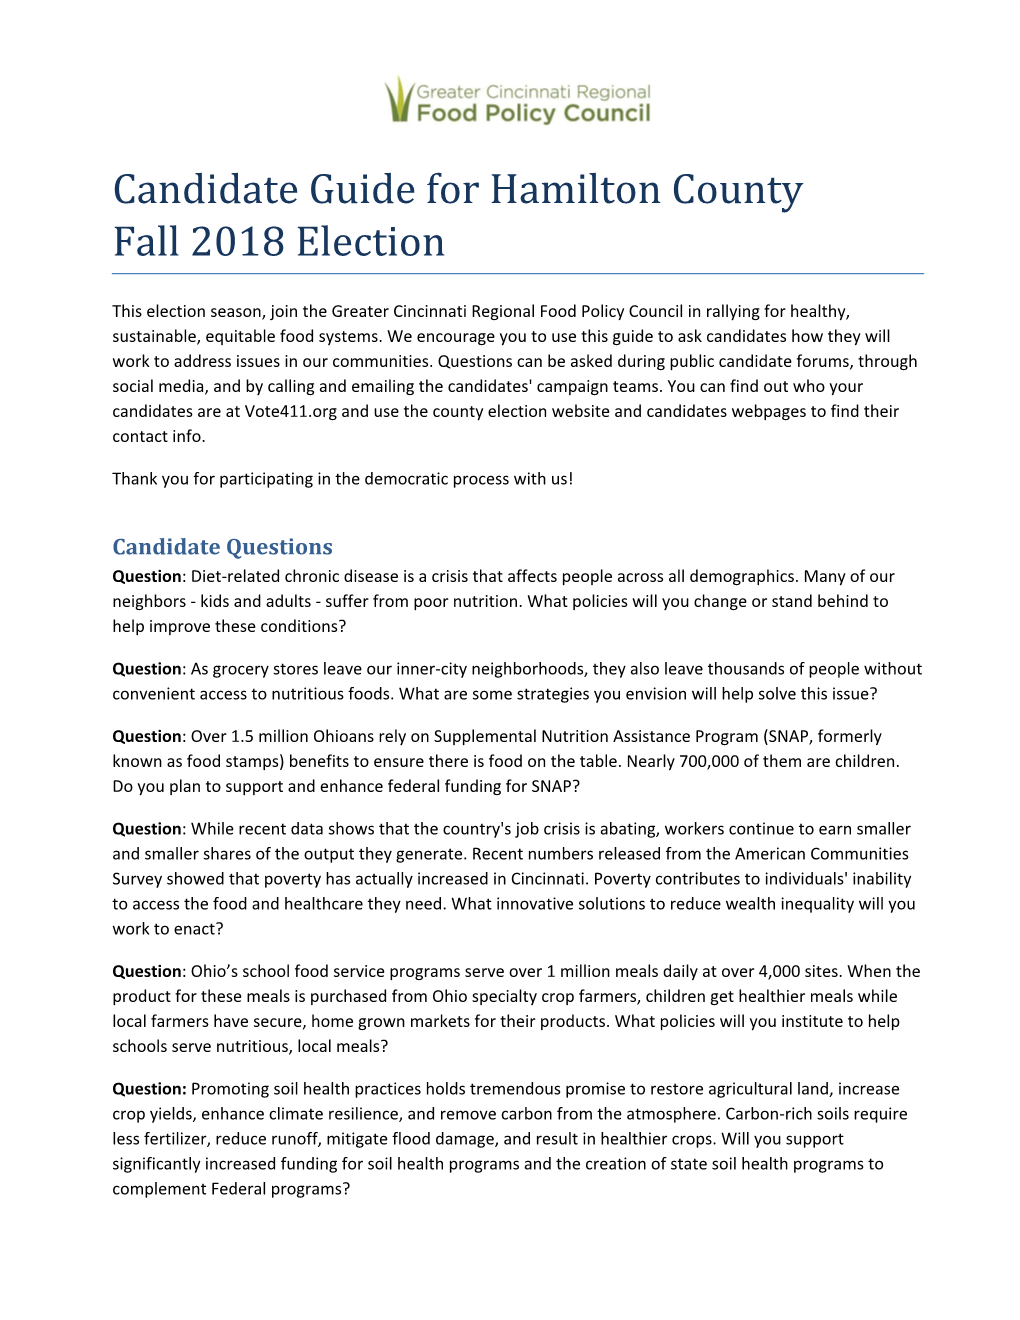 Candidate Guide for Hamilton County Fall 2018 Election